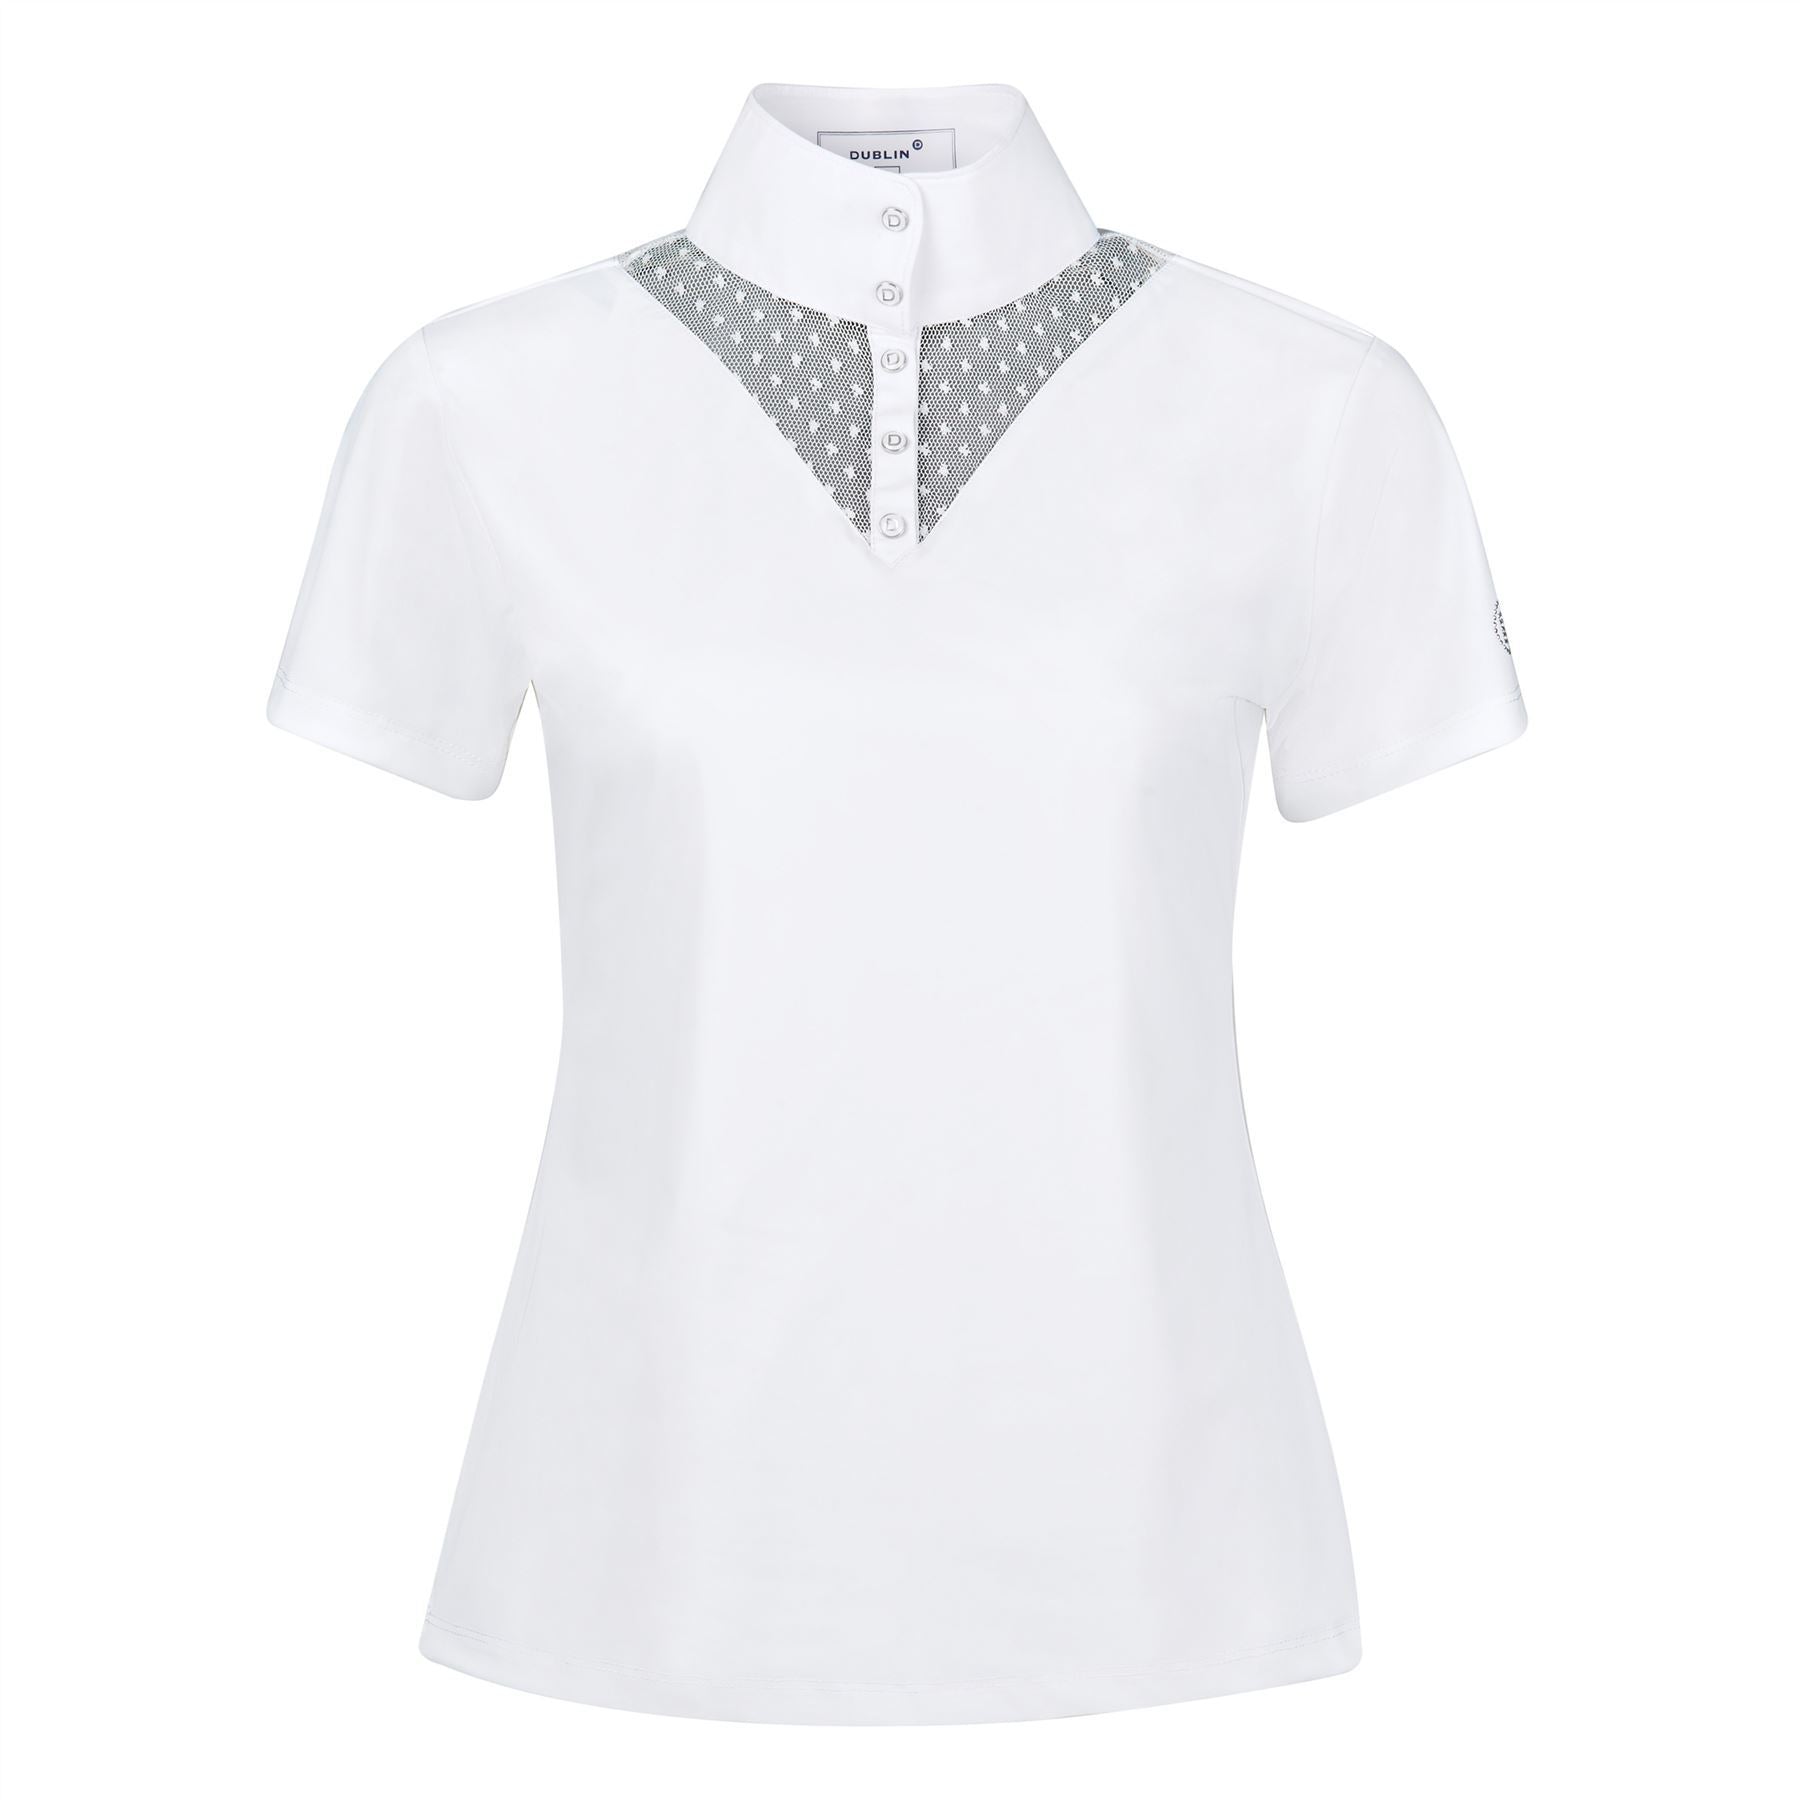 Dublin Tara Competition Lace Shirt - Just Horse Riders